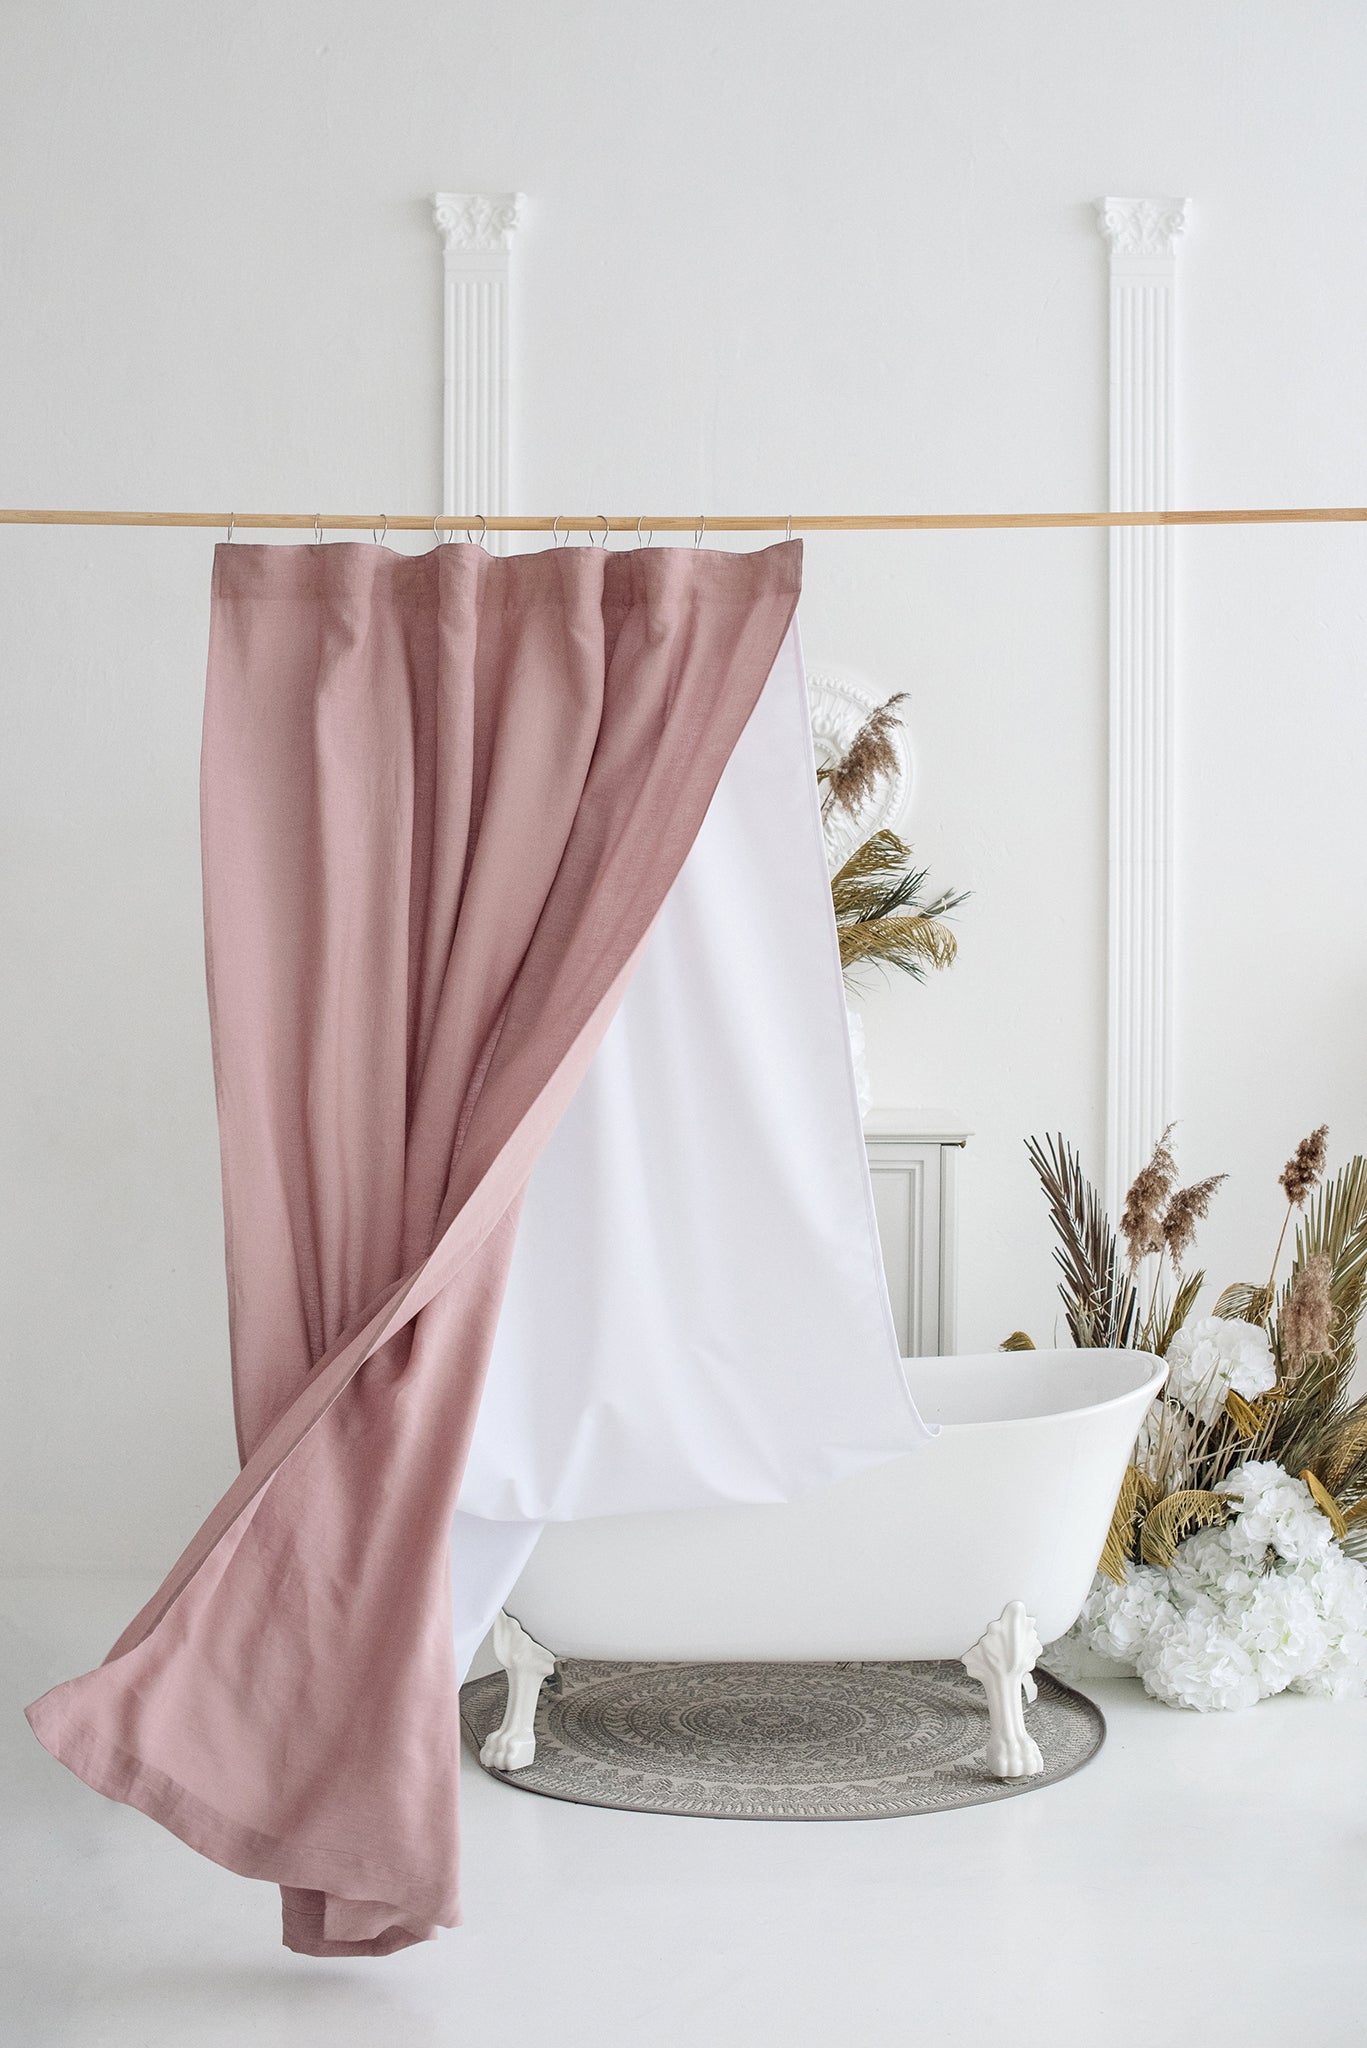 Linen Shower Curtains: A Sustainable and Eco-Friendly Choice for Your Bathroom